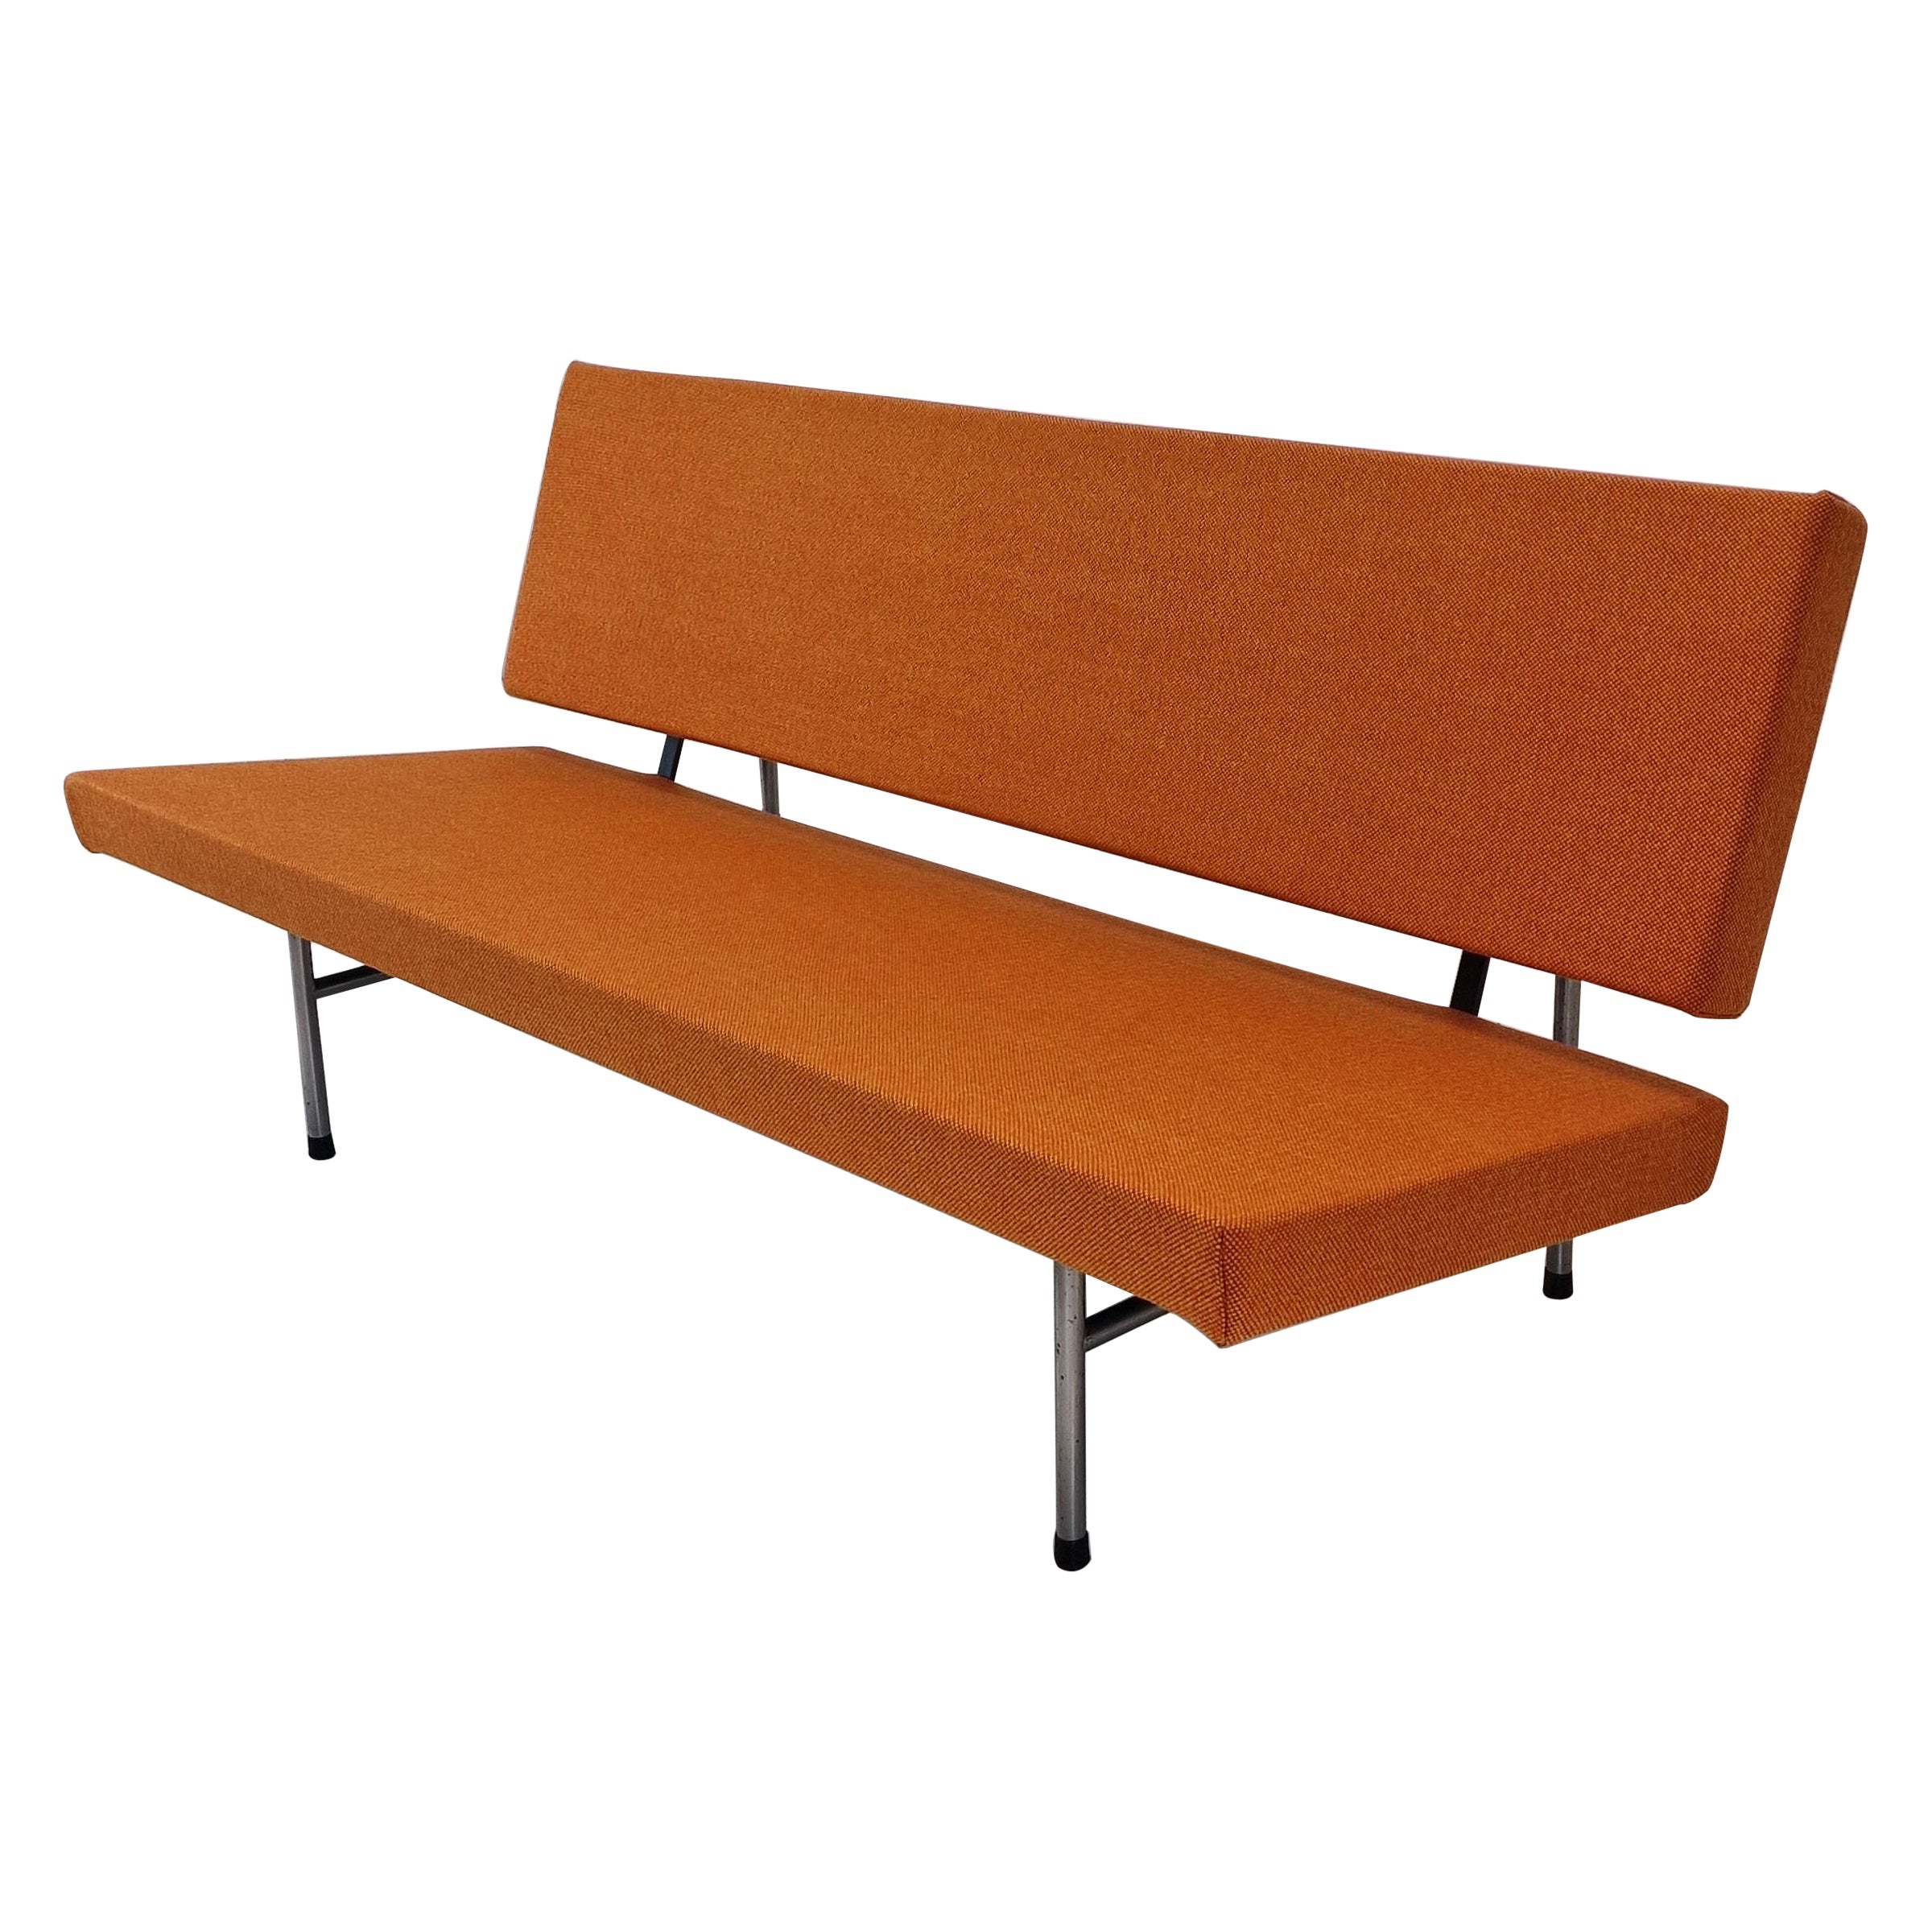 Midcentury 2-Seat Sofa by A.R. Cordemeyer for Gispen, 1960s For Sale